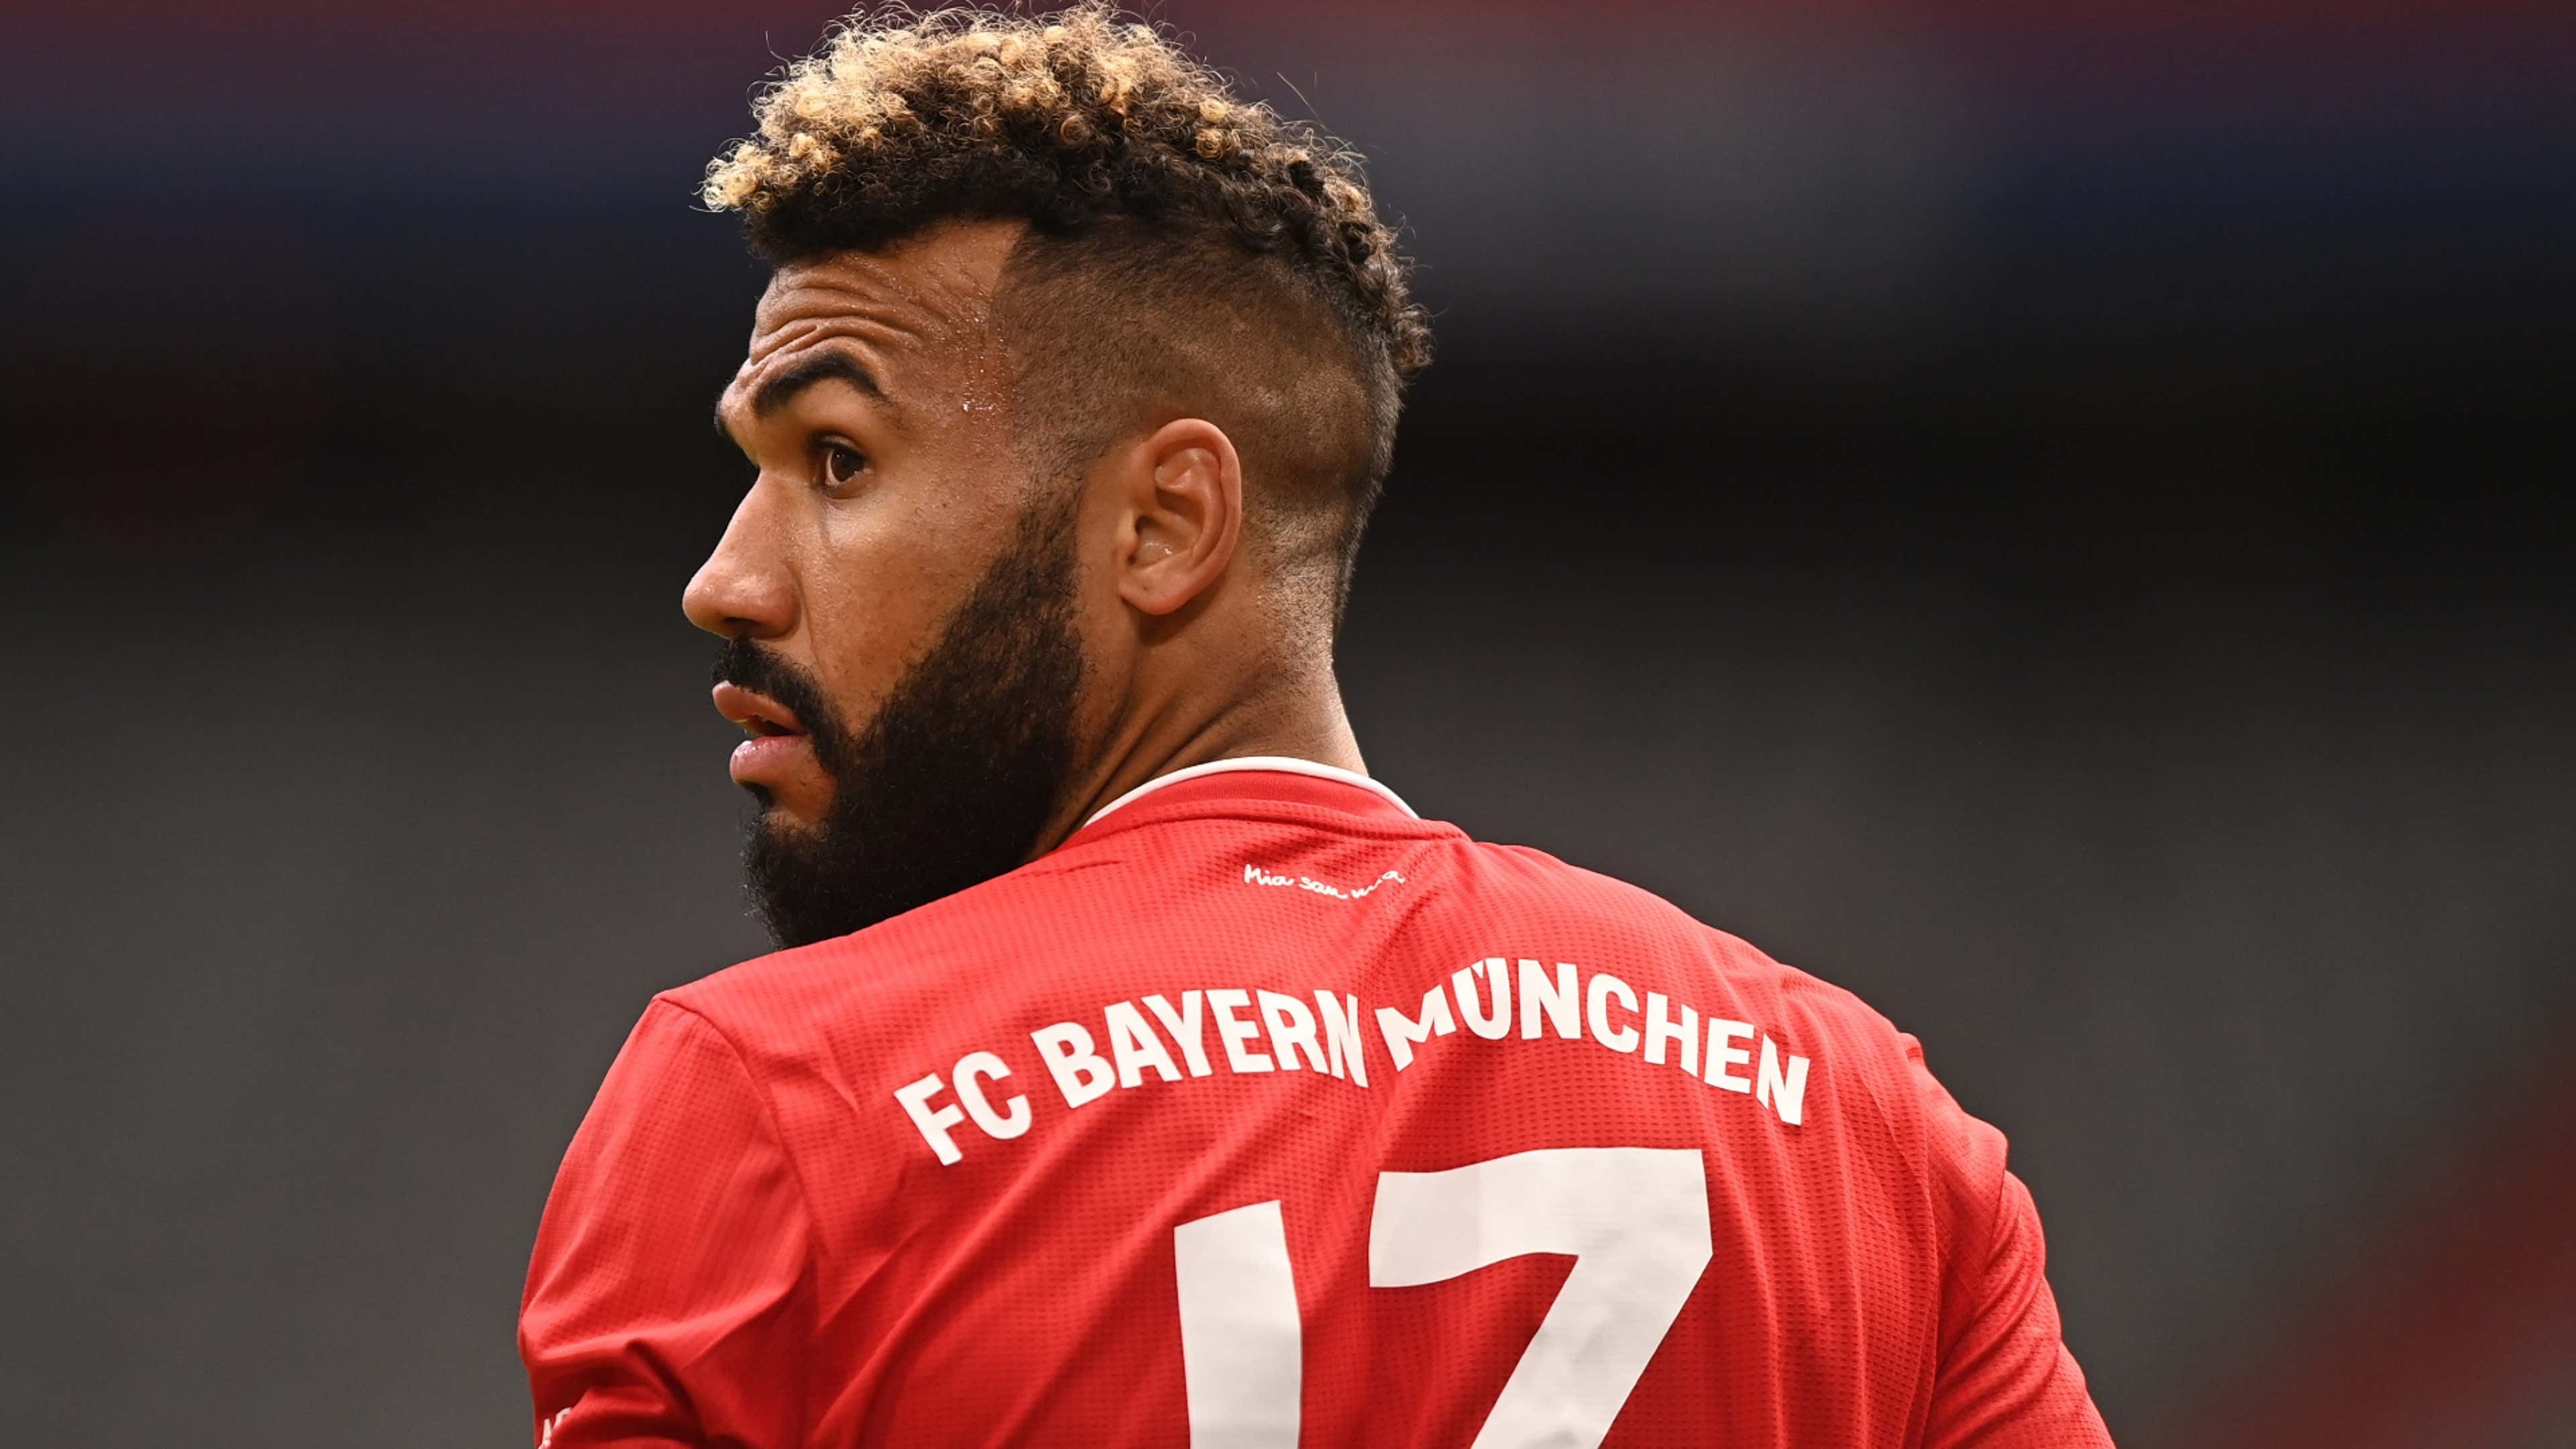 Barcelona Management Looks To Sign Choupo-Moting As Free Agent